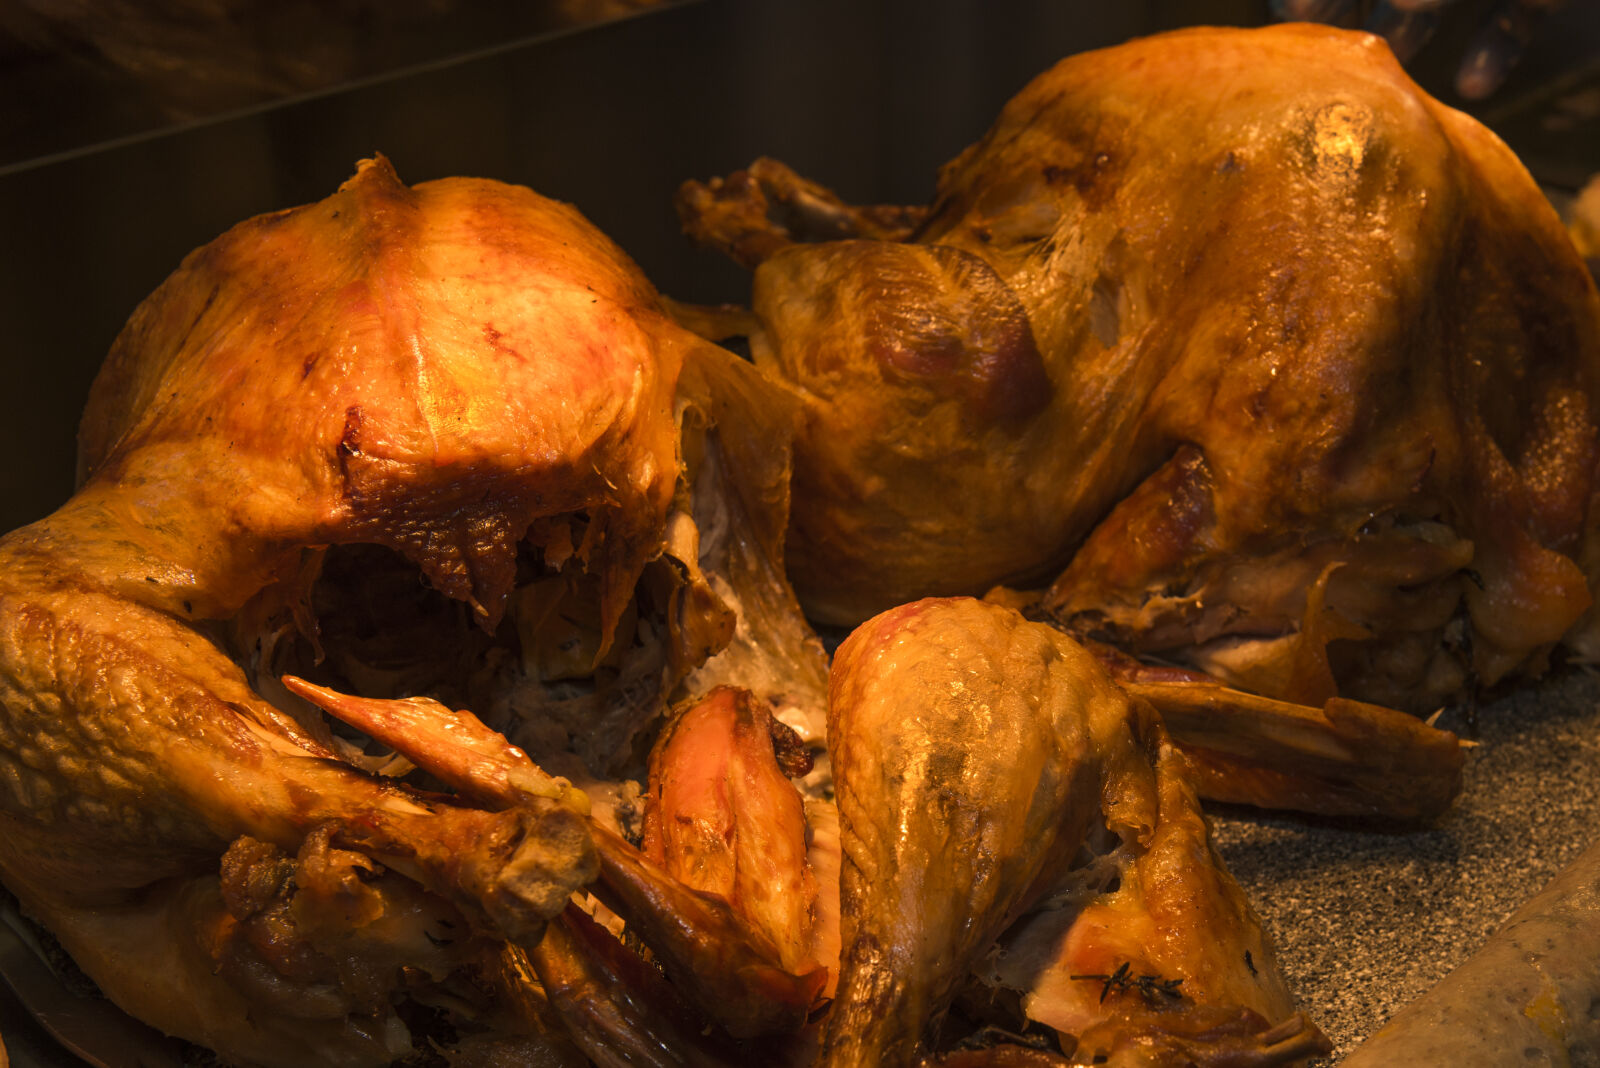 Nikon D750 sample photo. Cooked, turkey, oven, baked photography